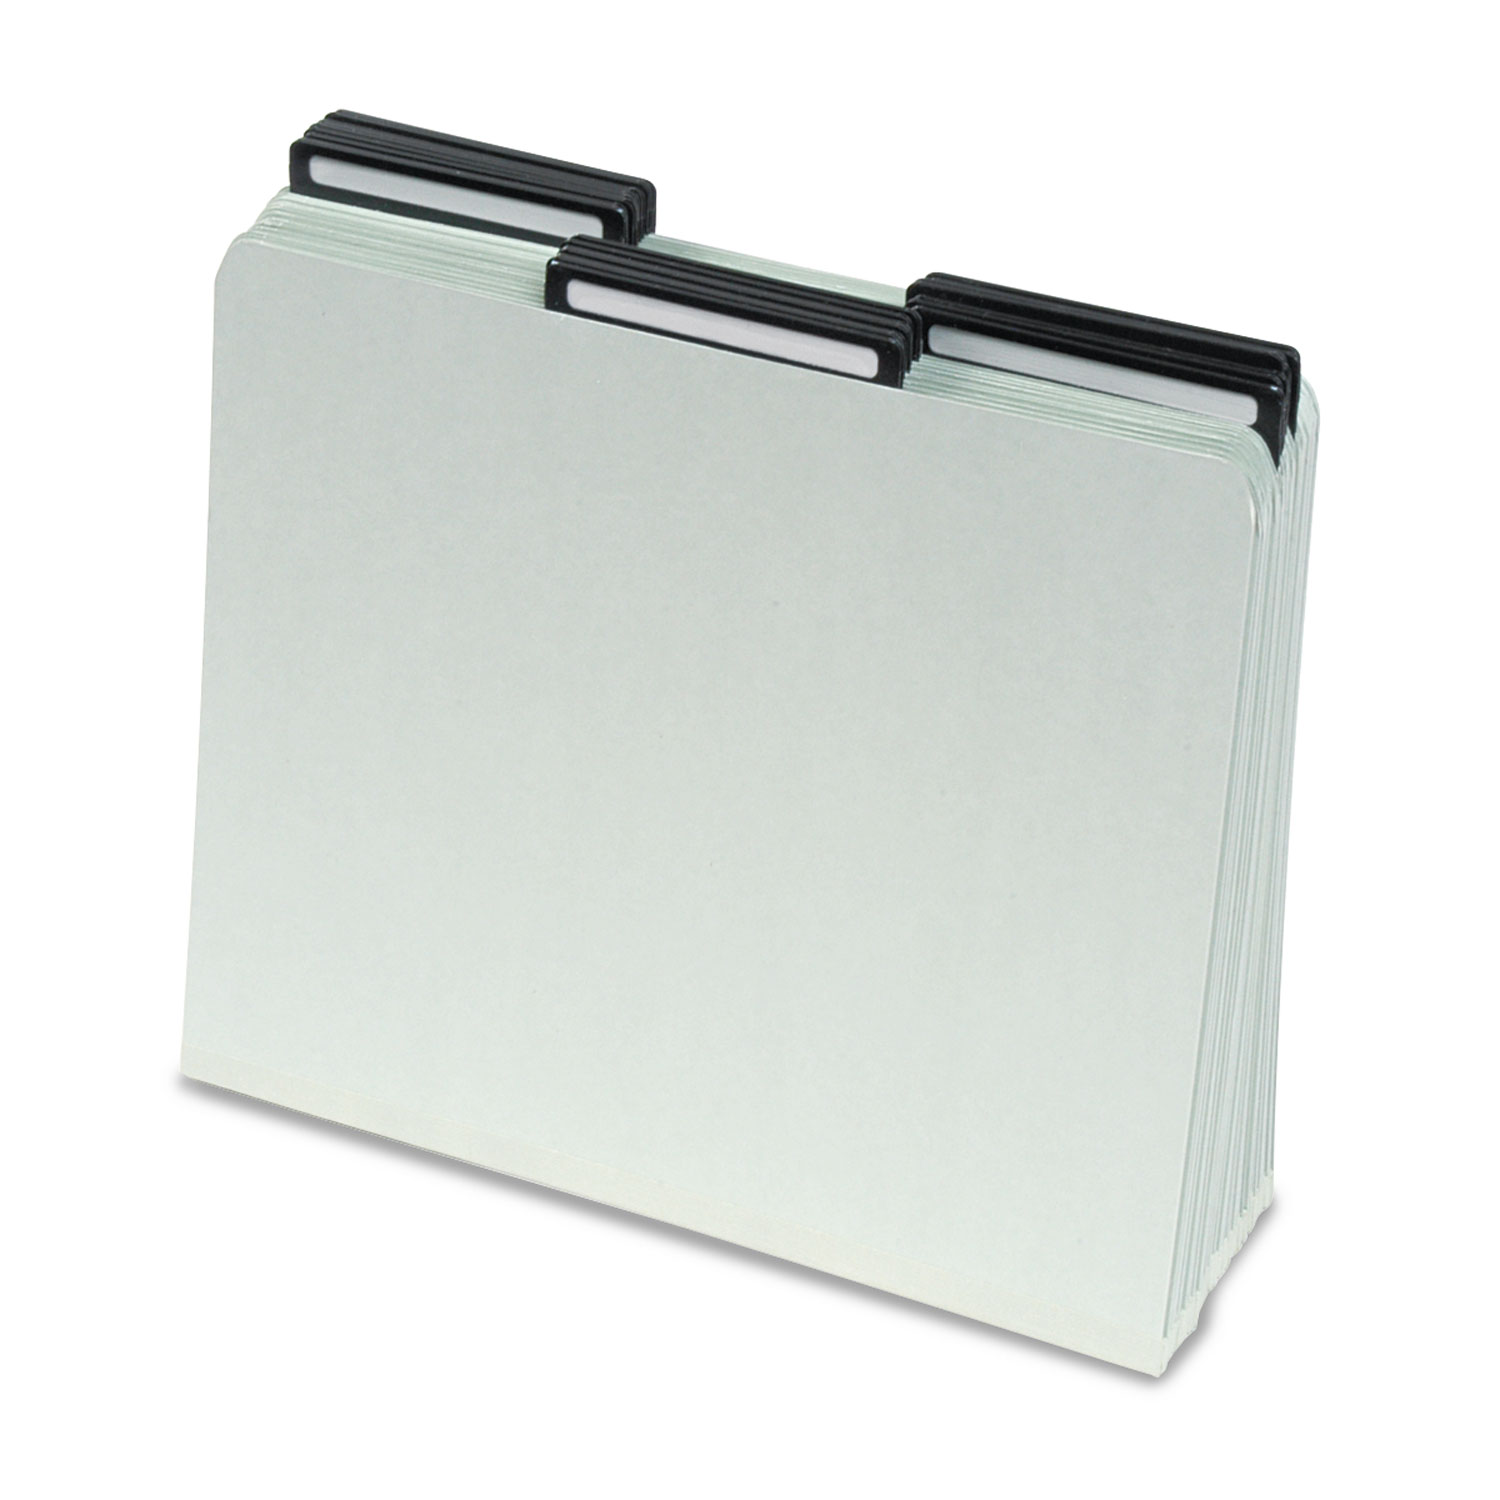 Recycled Heavy Pressboard File Folders with Insertable Metal Tabs, 1/3-Cut Tabs, Letter Size, Gray-Green, 25/Box